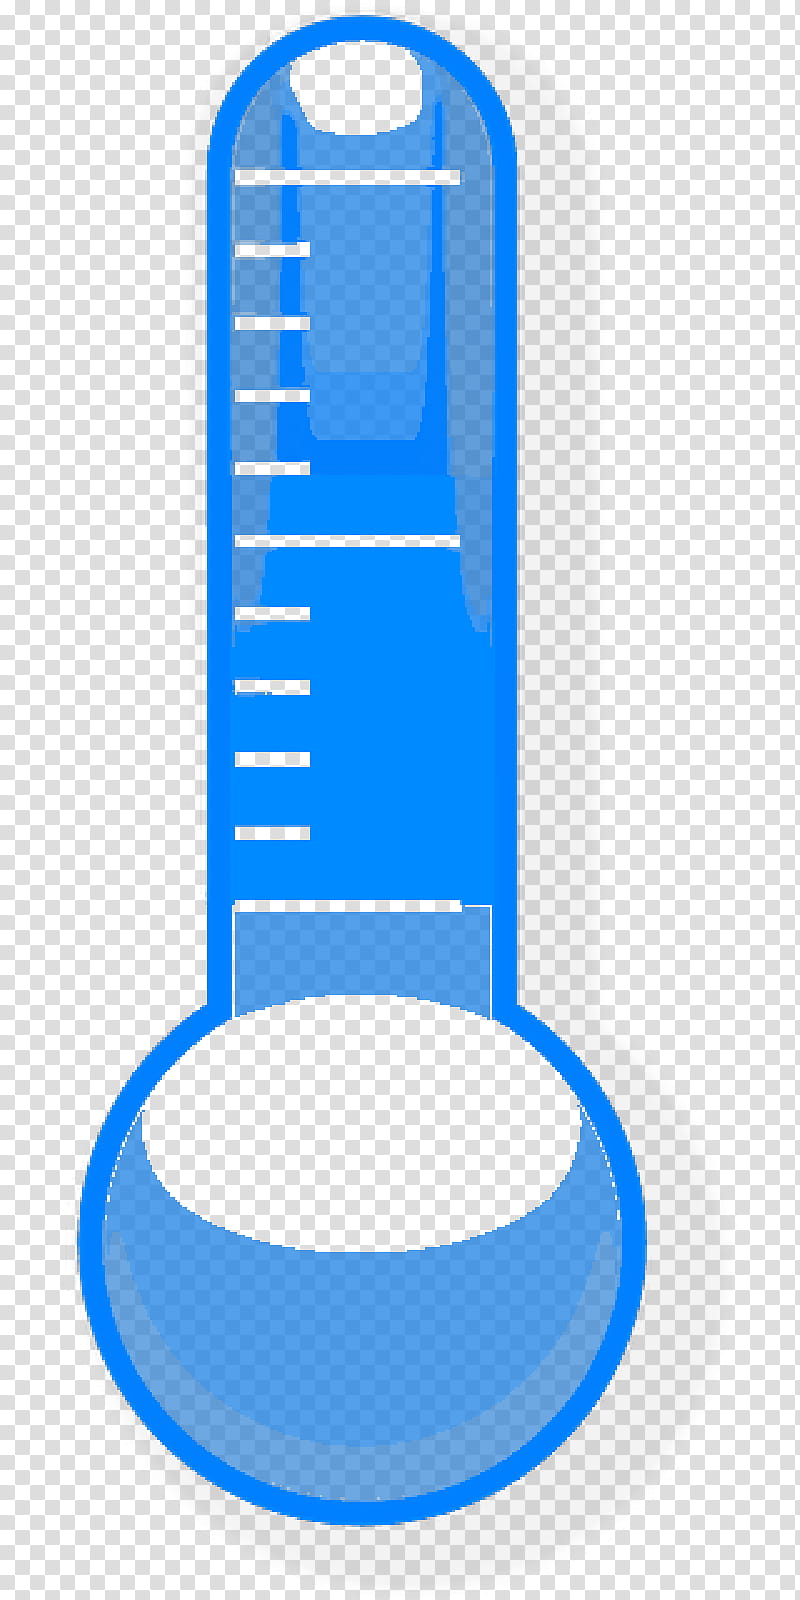 Thermometer Graduated Cylinder, Cold, Temperature, Measurement, Fever, Electric Blue transparent background PNG clipart